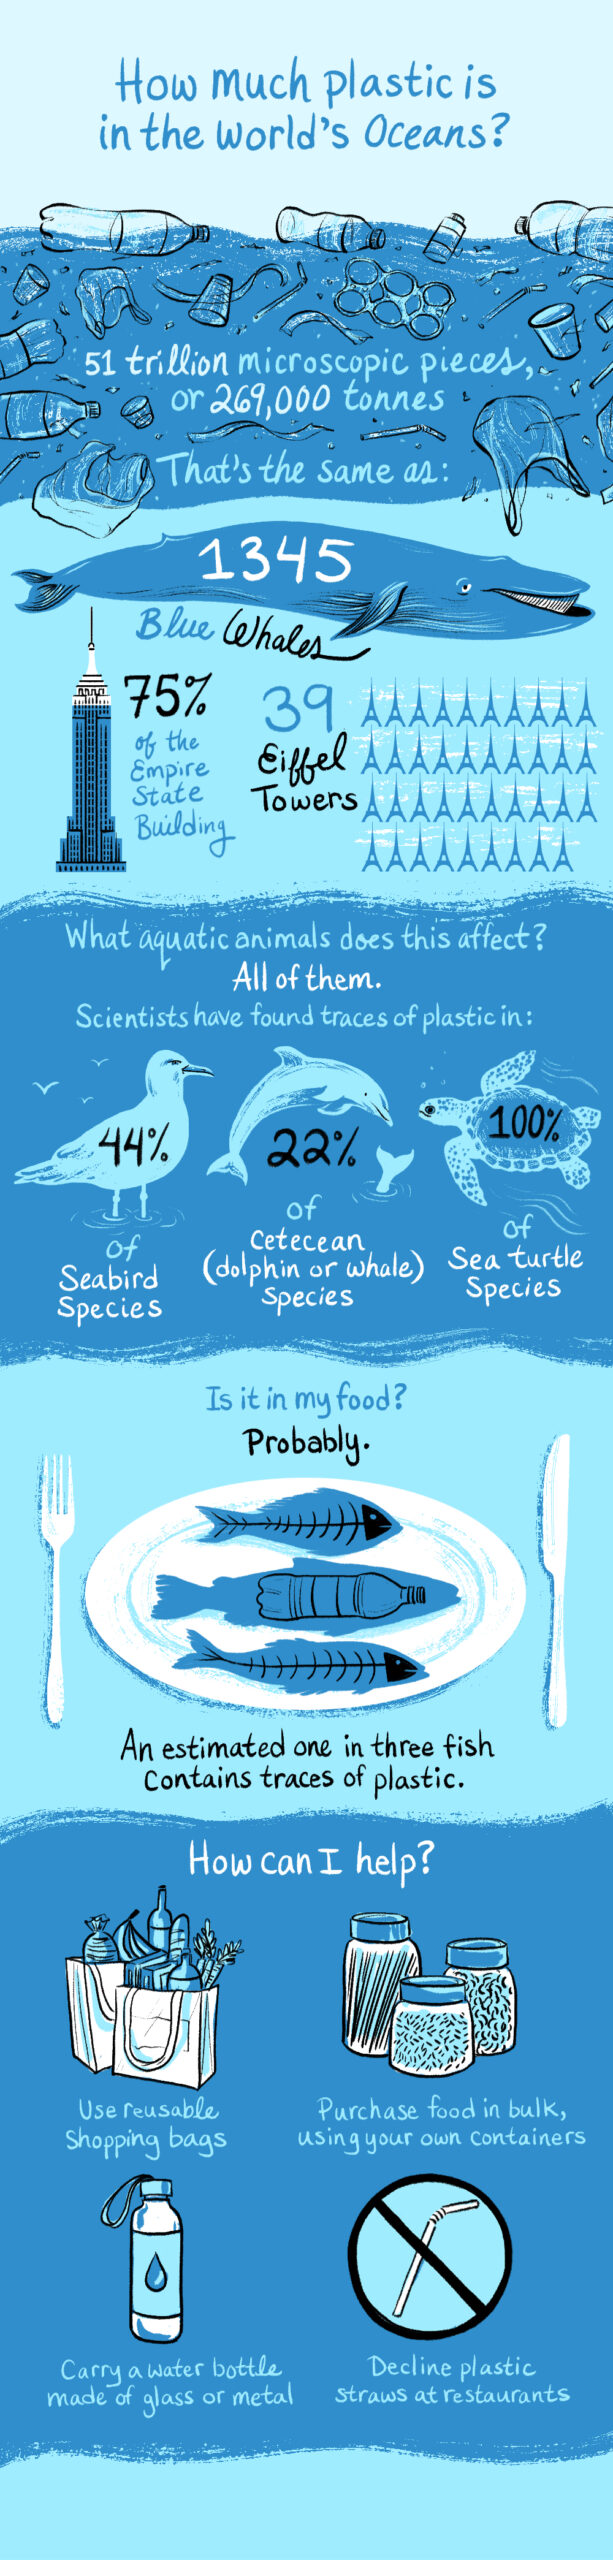 Add comment Cancel reply | Ocean pollution, Pollution, Infographic